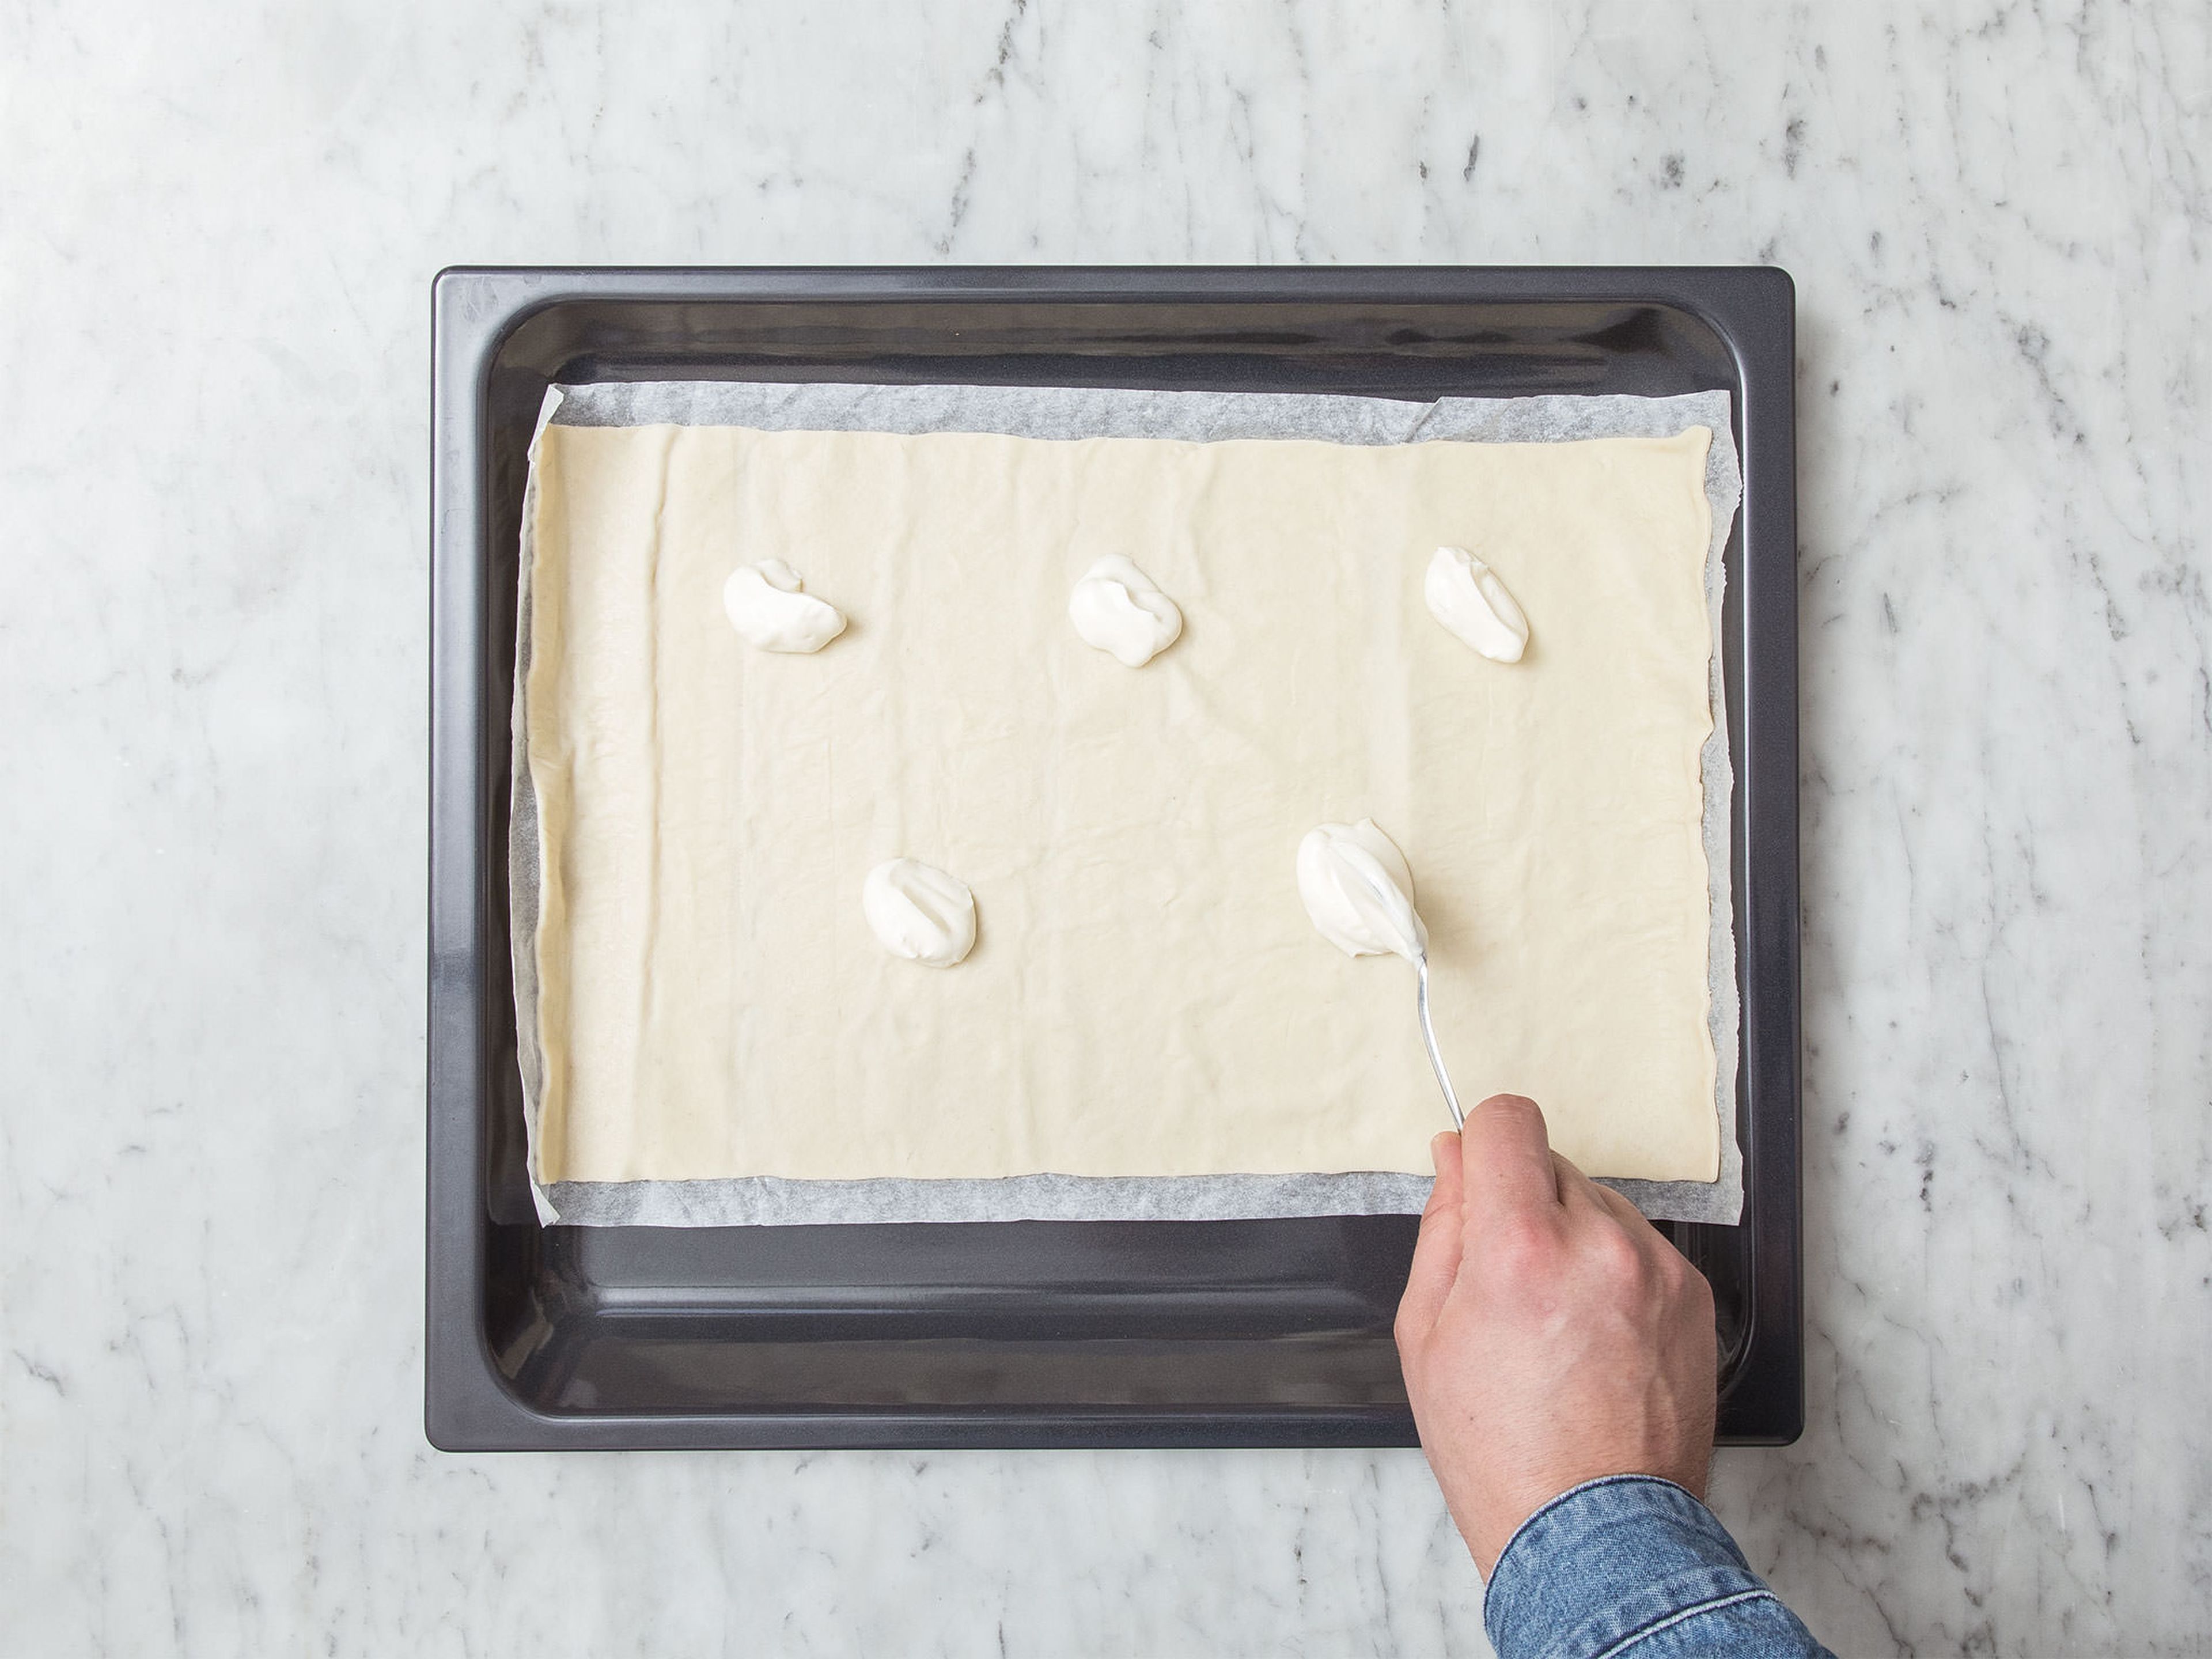 Preheat oven to 200°C/390°F. Transfer dough to a parchment-lined baking sheet. Spread sour cream in an even layer onto the dough.